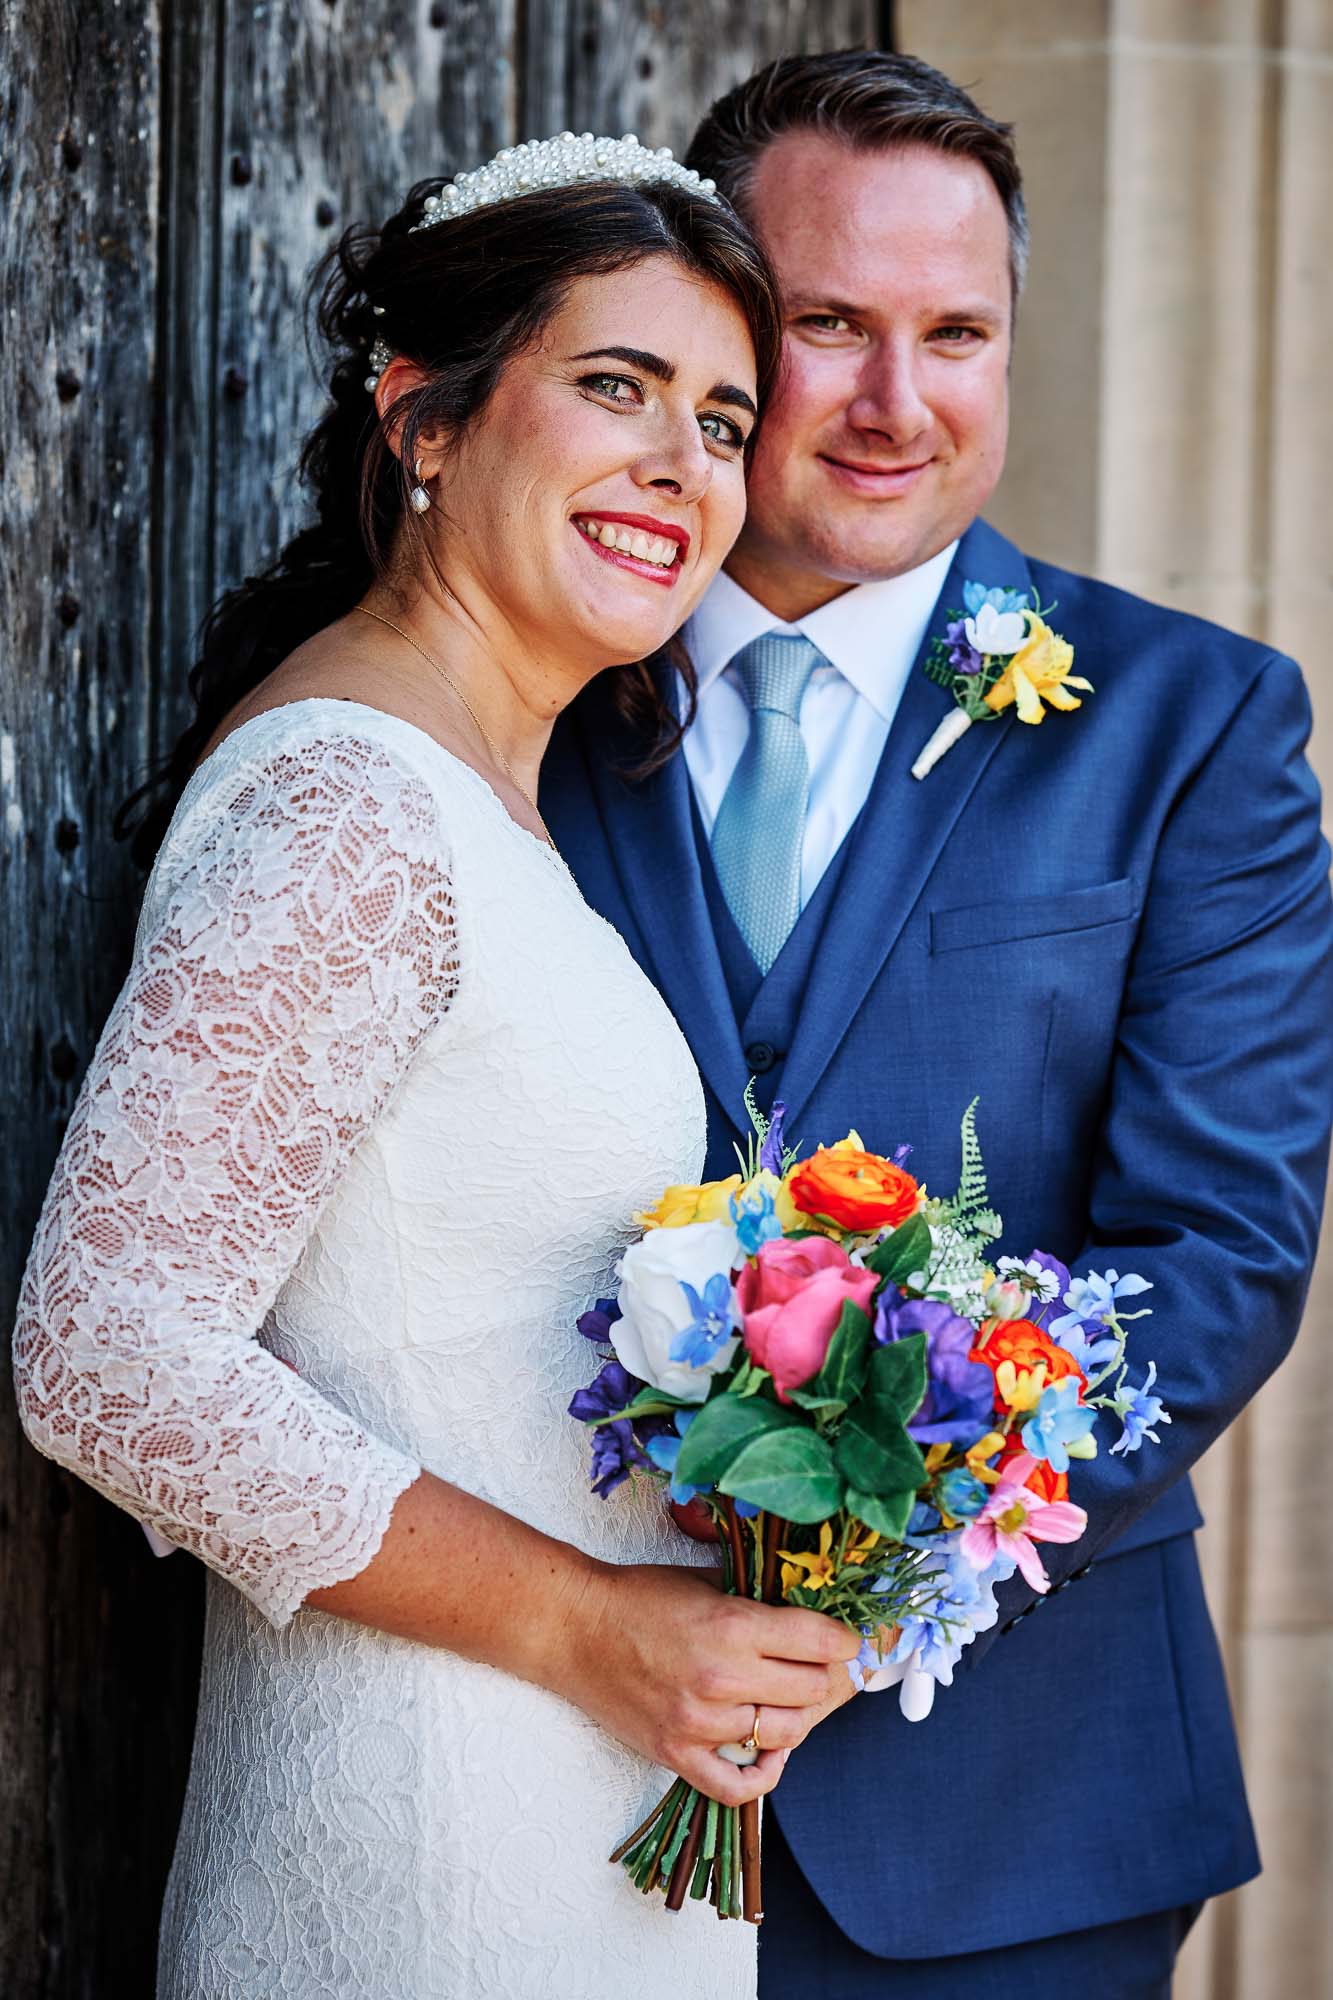 Best Recommended Wedding Photographer Henley Rooms Hotel Indigo Chris Fossey Photography AM